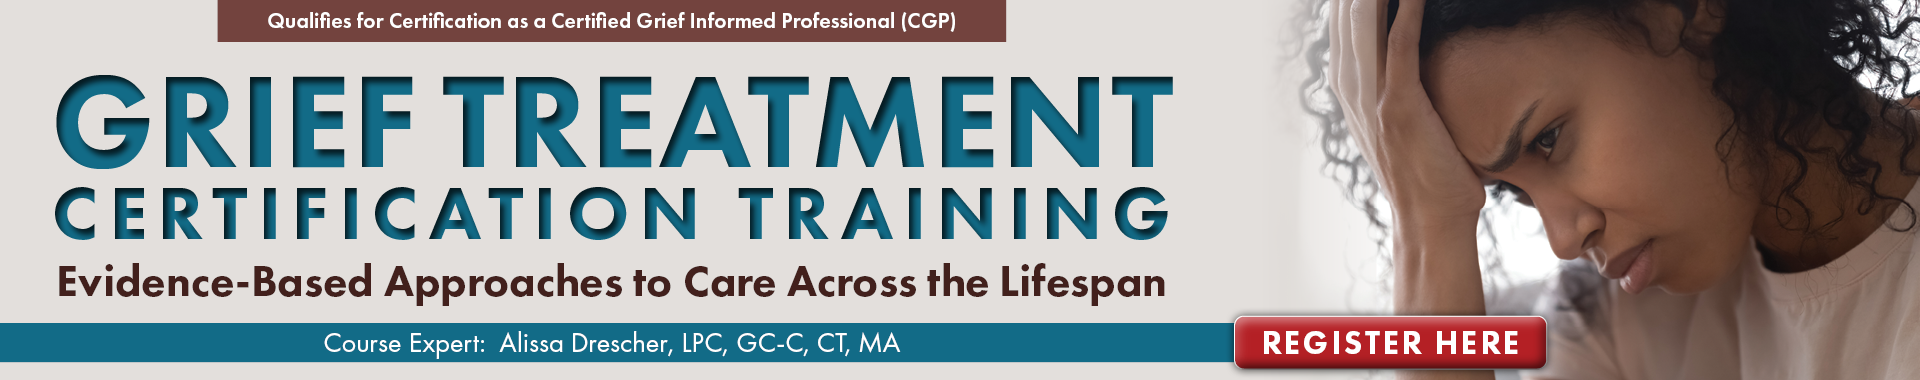 Grief Treatment Certification Training: Evidence-Based Approaches to Care Across the Lifespan